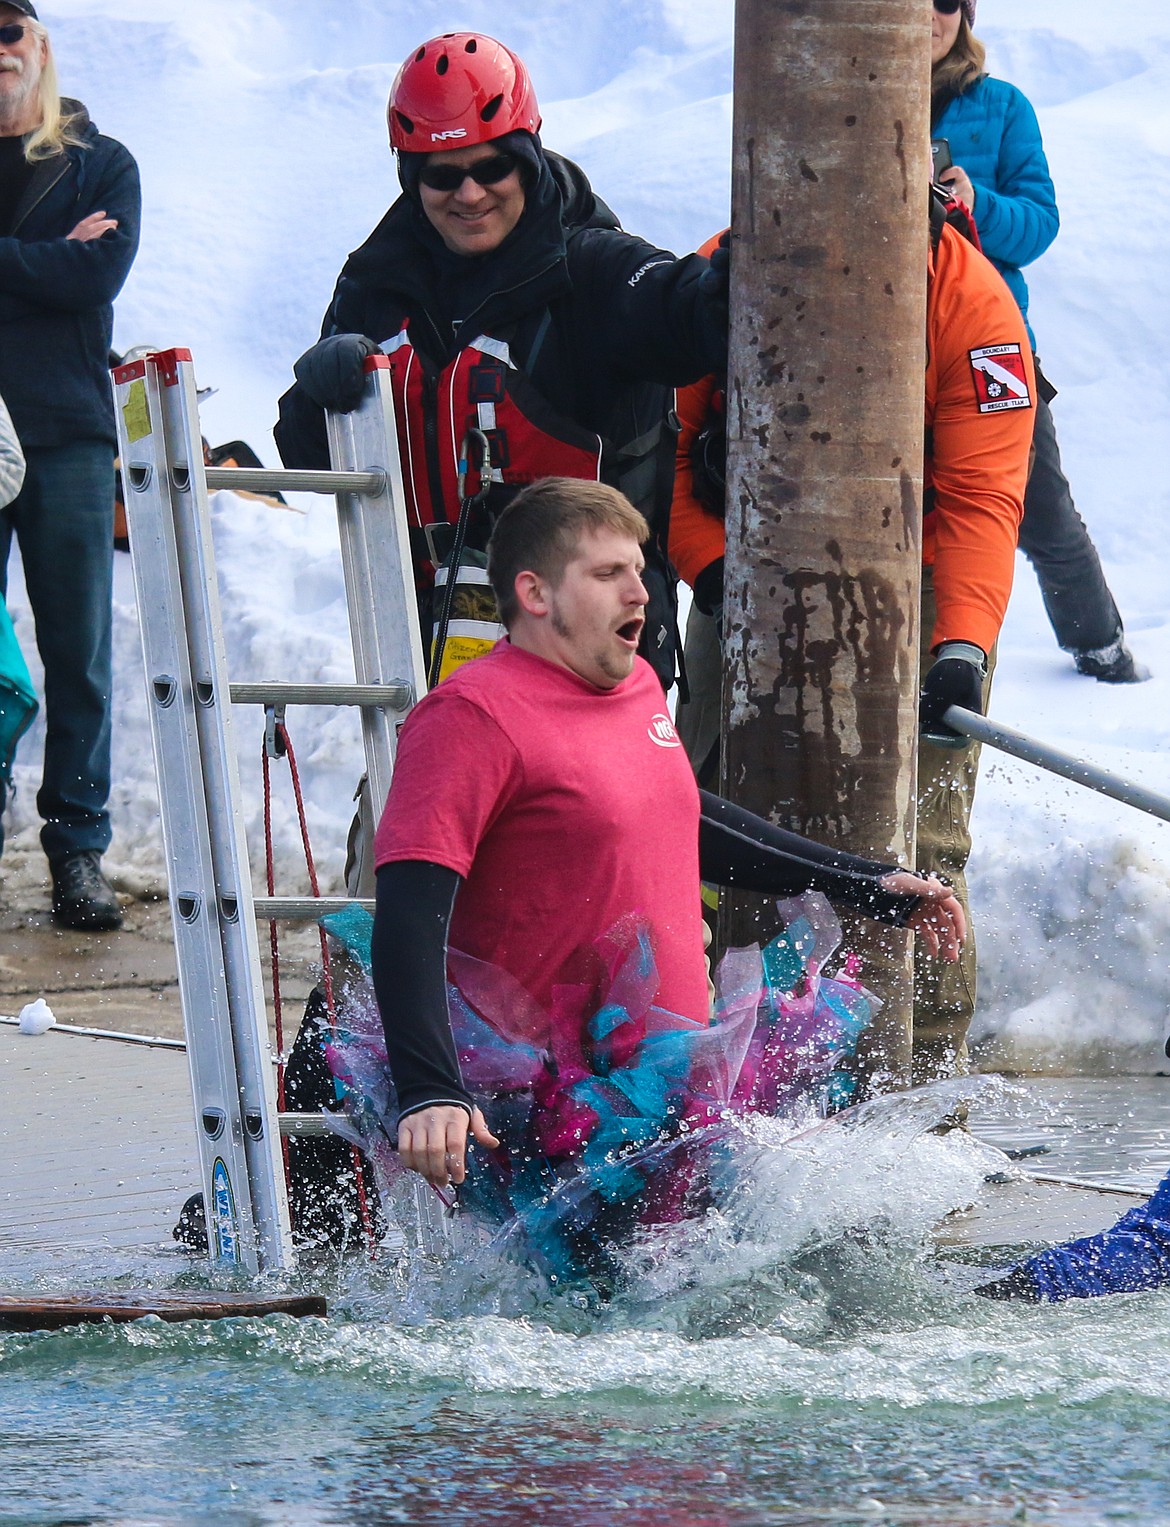 Photo by MANDI BATEMAN
Hundreds attended the 2019 Penguin Plunge on Saturday along the ice-cold Kootenai River. The event raised more than $12,500 for the local Special Olympics program.